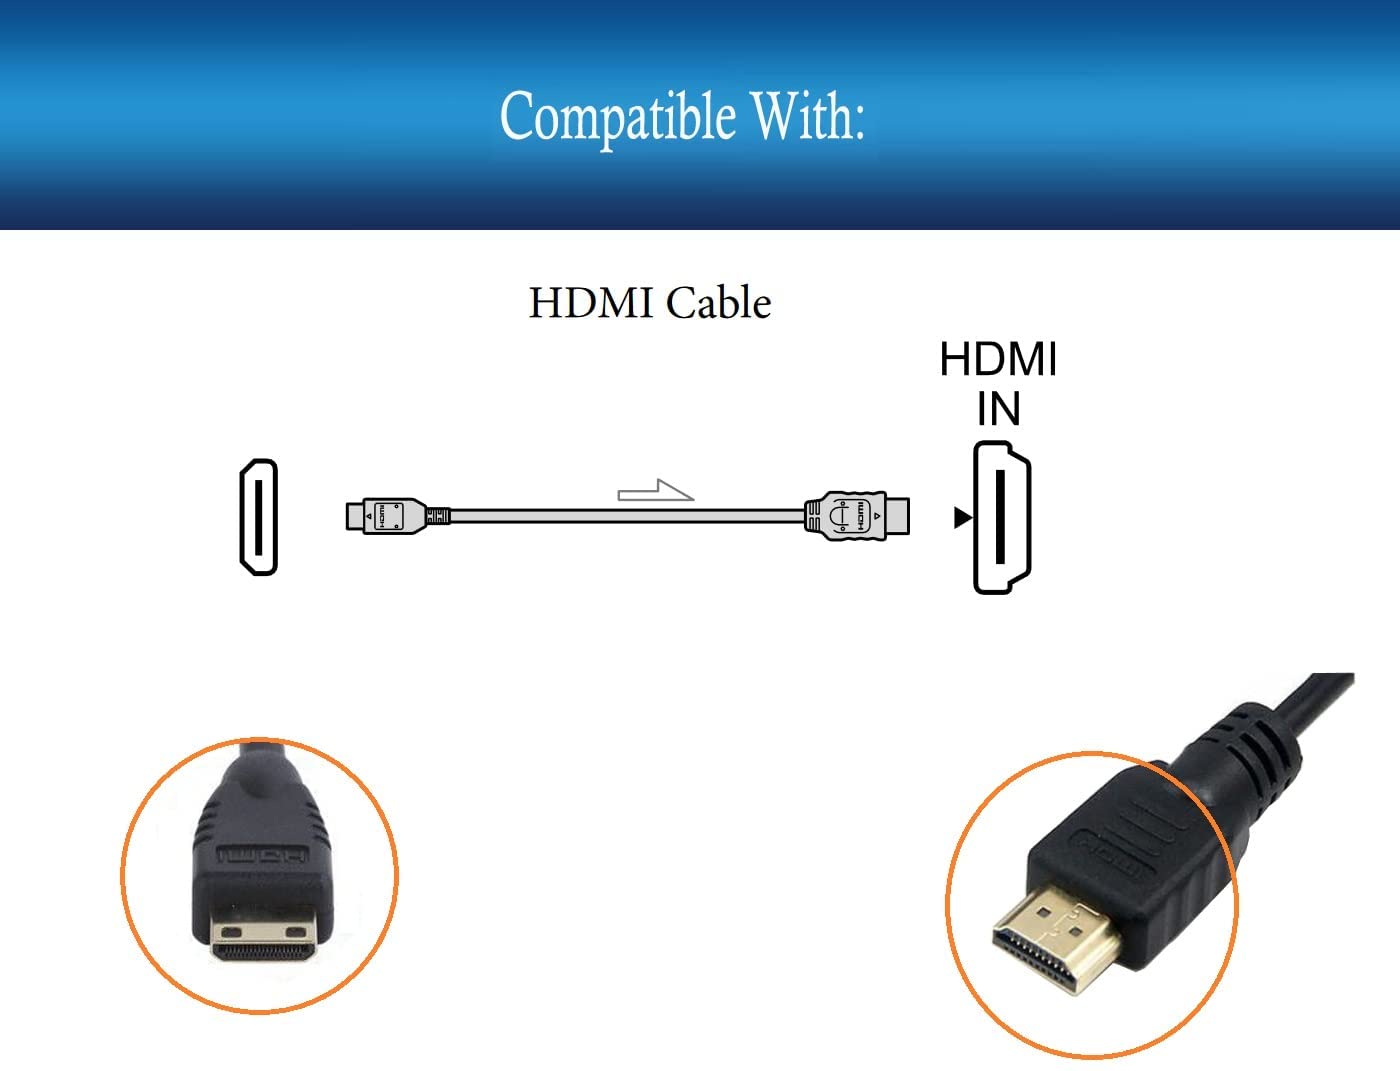 UPBRIGHT NEW HDMI to Mini HDMI C AV TV-Out Lead Cable Cord For Sony Alpha Digital SLR Camera,NEX-3 K/S K/B to HDTV,NEX-5 K/S K/B to HDTV,A330 10.2 MP Digital SLR Camera,A35 16.2 MP Digital SLR Camera, - image 3 of 5